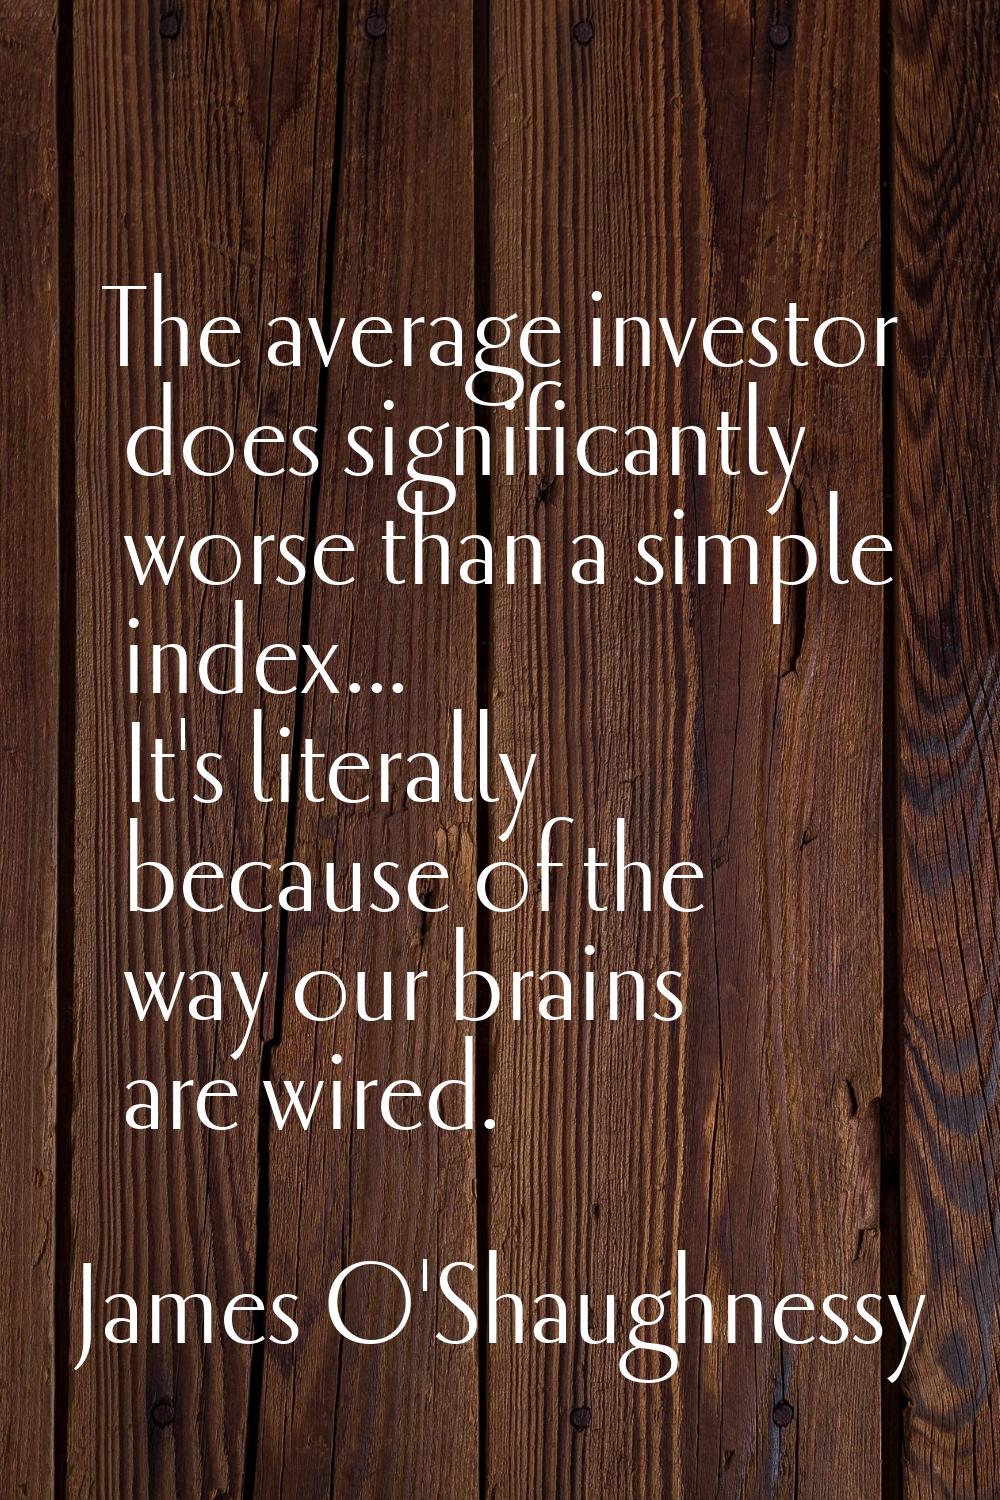 The average investor does significantly worse than a simple index... It's literally because of the 